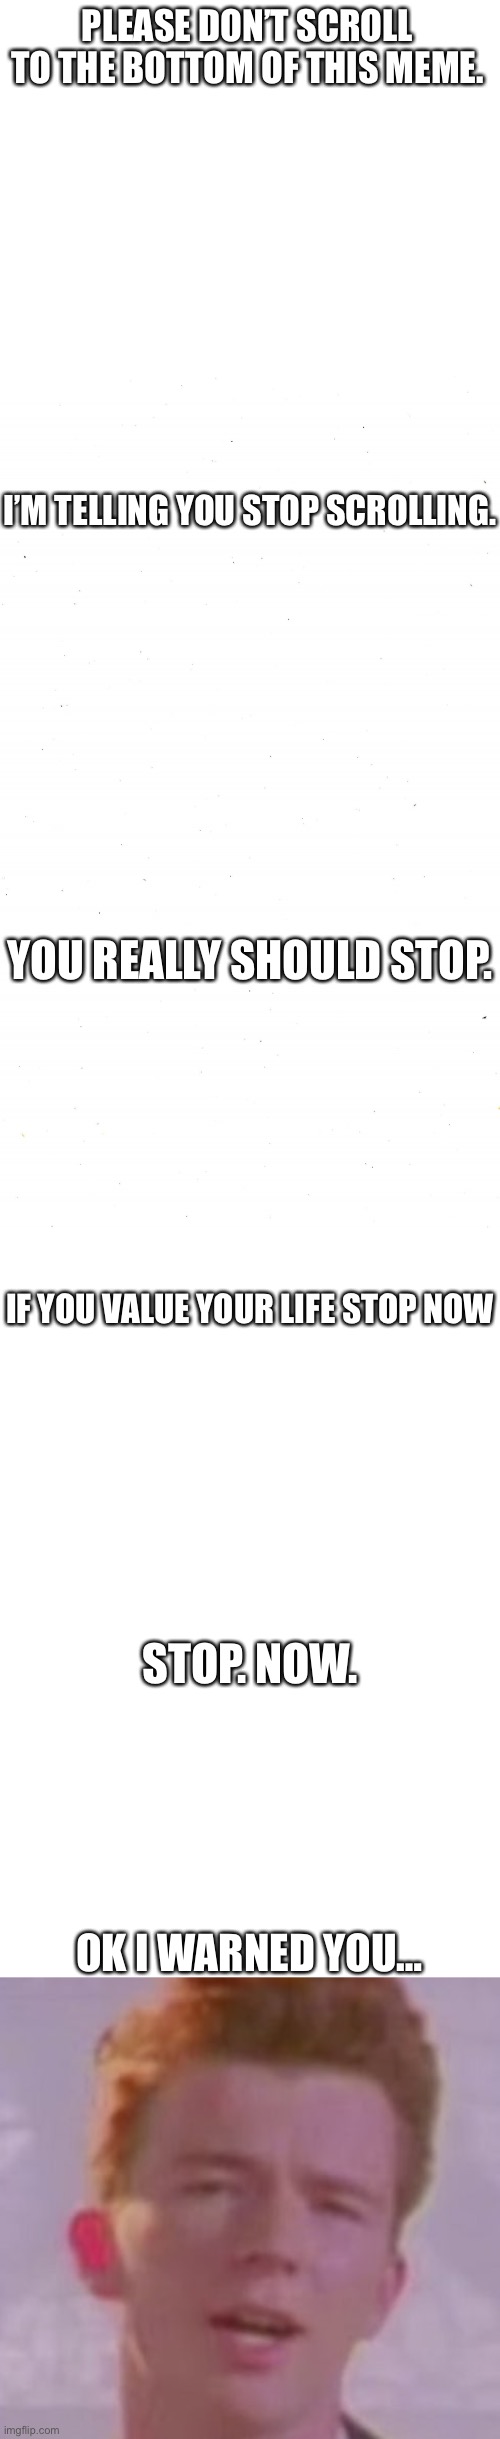 Do not scroll. | PLEASE DON’T SCROLL TO THE BOTTOM OF THIS MEME. I’M TELLING YOU STOP SCROLLING. YOU REALLY SHOULD STOP. IF YOU VALUE YOUR LIFE STOP NOW; STOP. NOW. OK I WARNED YOU… | image tagged in blank white template,plain white | made w/ Imgflip meme maker